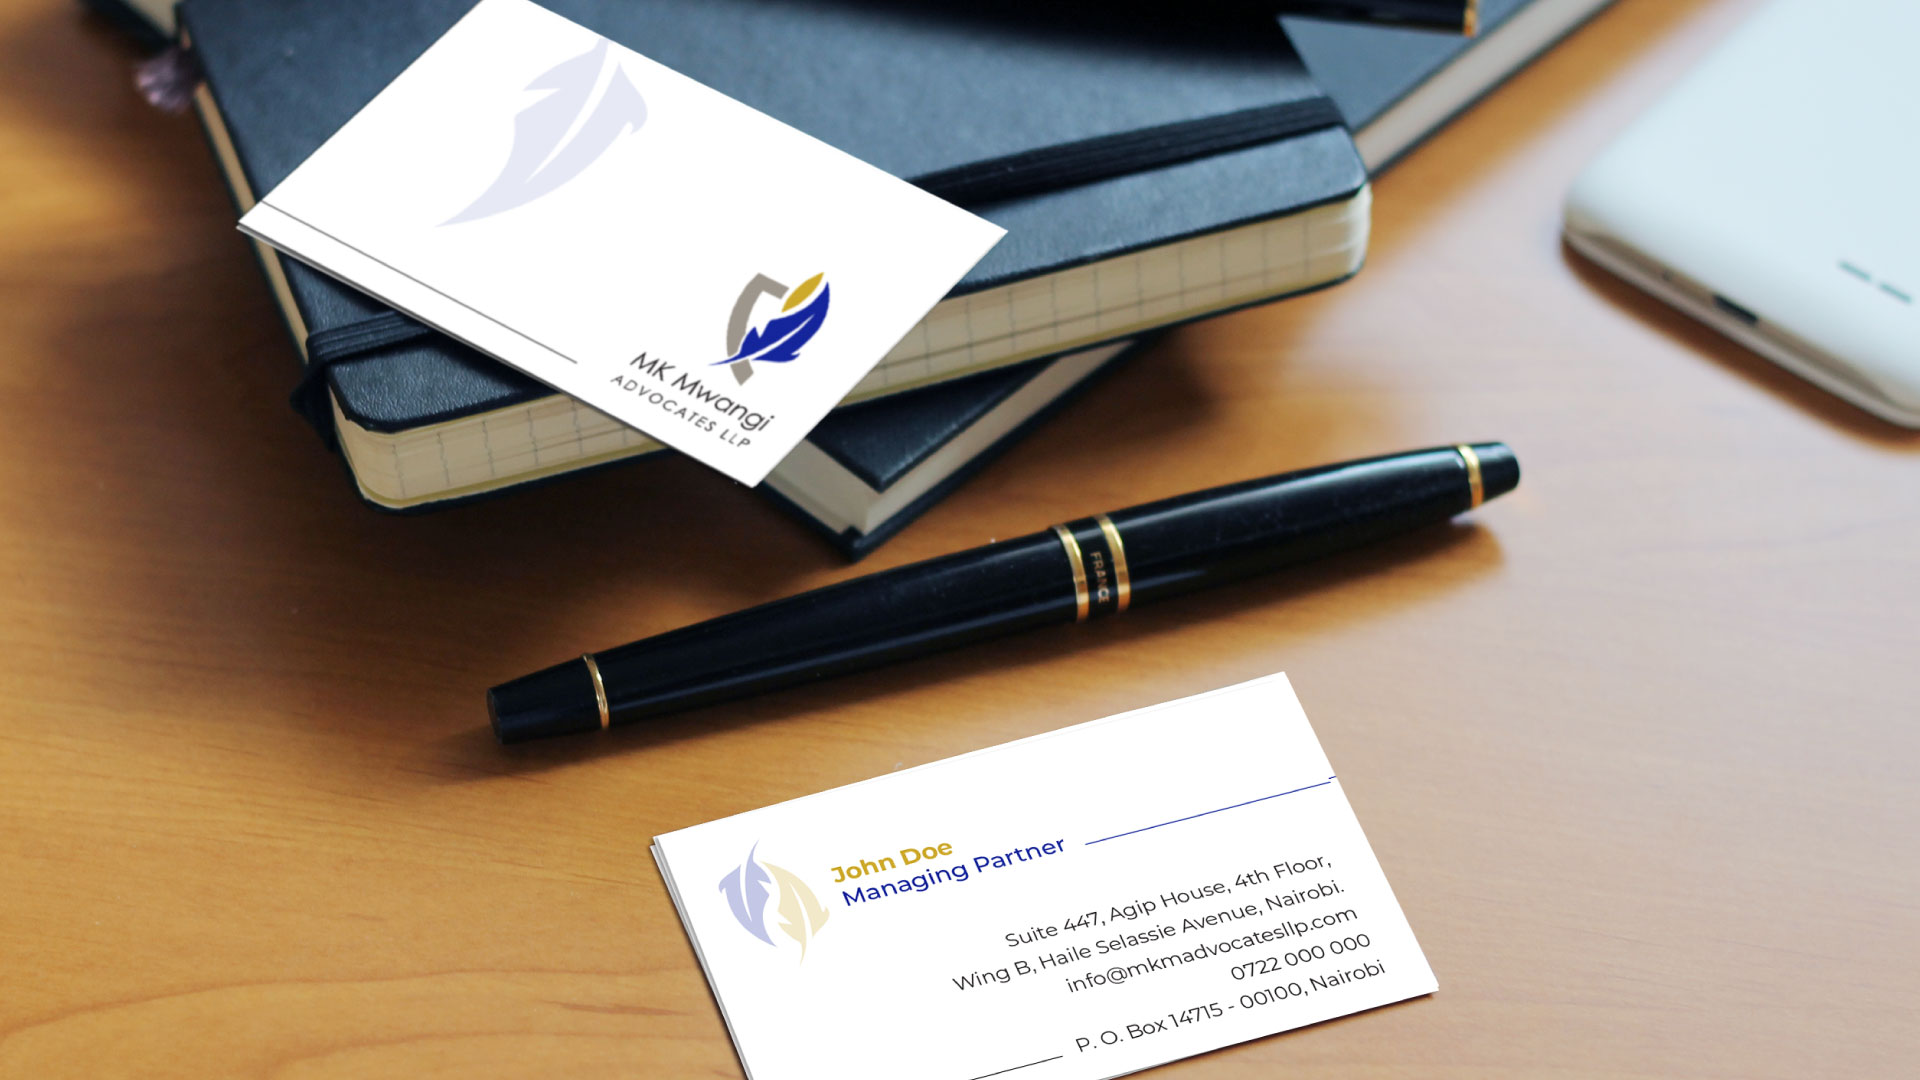 Marketing Collateral, Business Cards for a Law Firm in Kenya